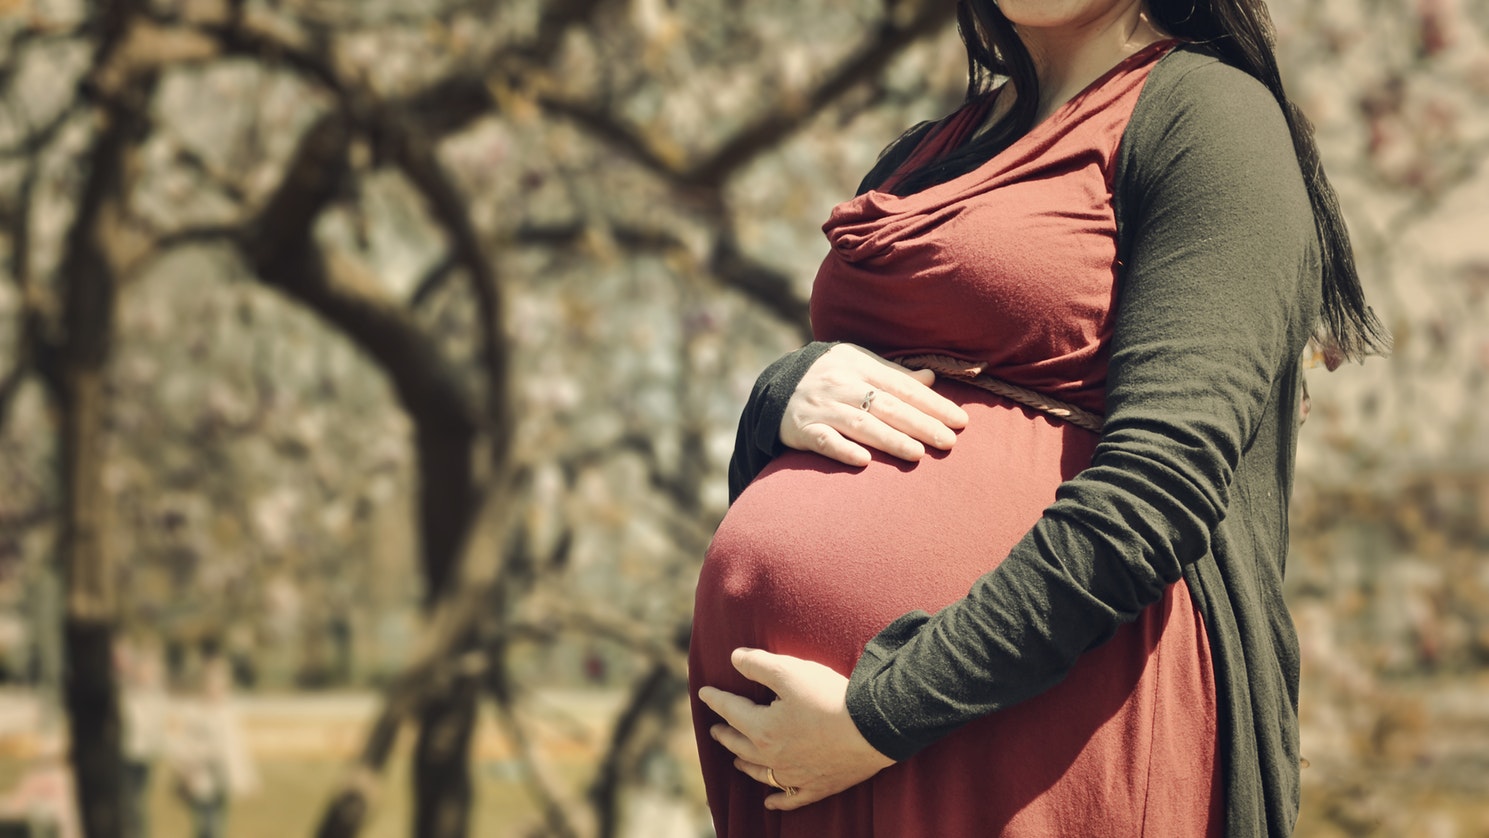 13 Tips When Choosing a Surrogate Mother Who Will Carry Your Baby